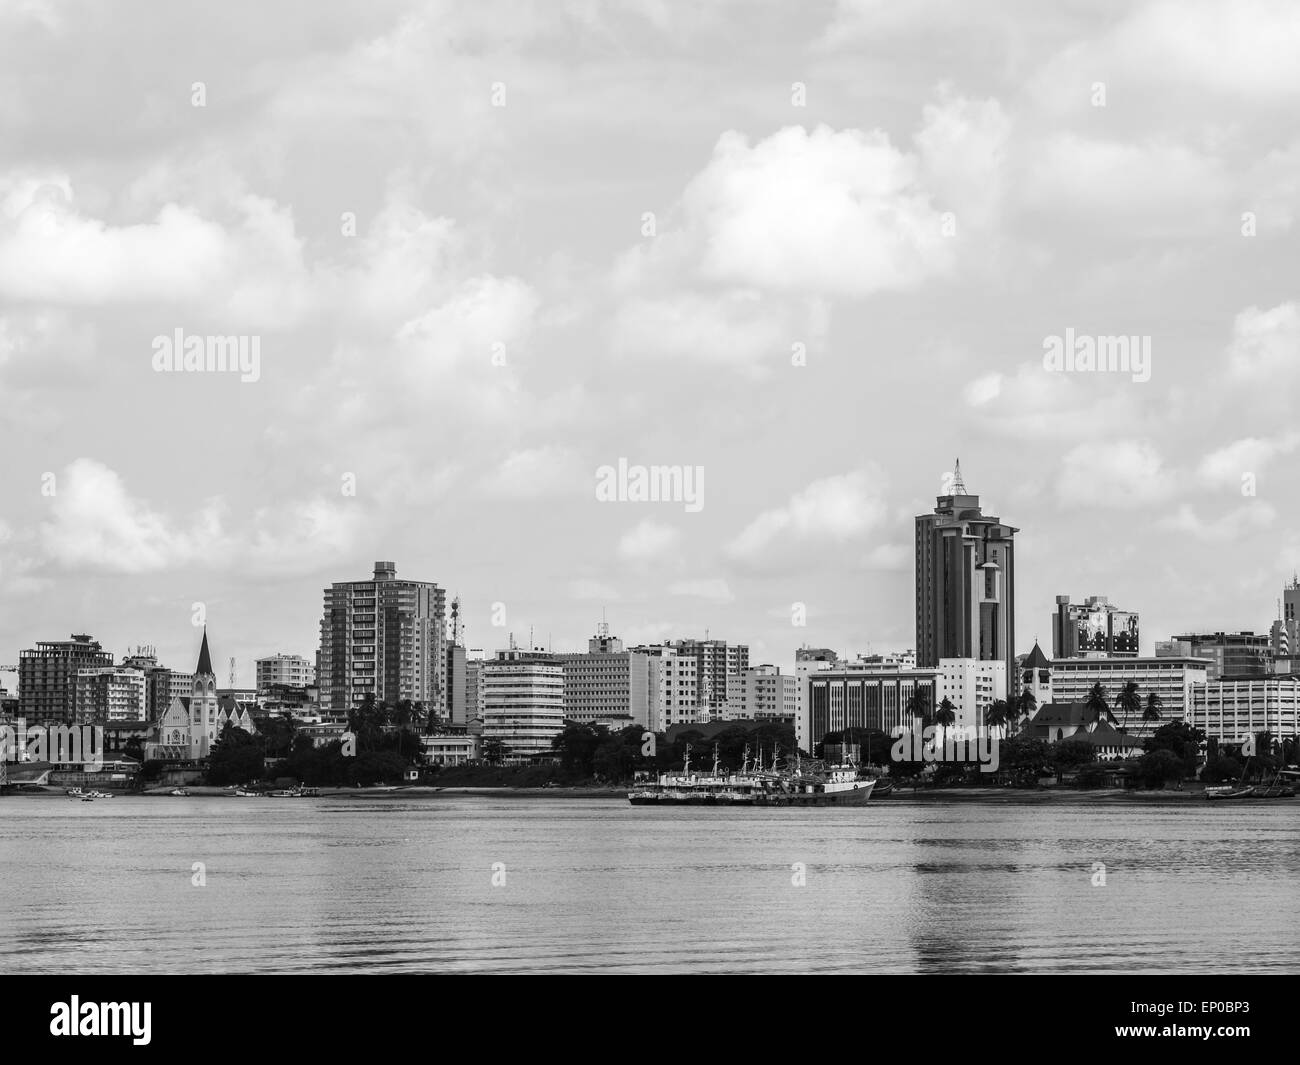 Waterfront of Dar es Salaam, Tanzania in East Africa, with modern architecture, seen from a boat. Horizontal, black and white. Stock Photo